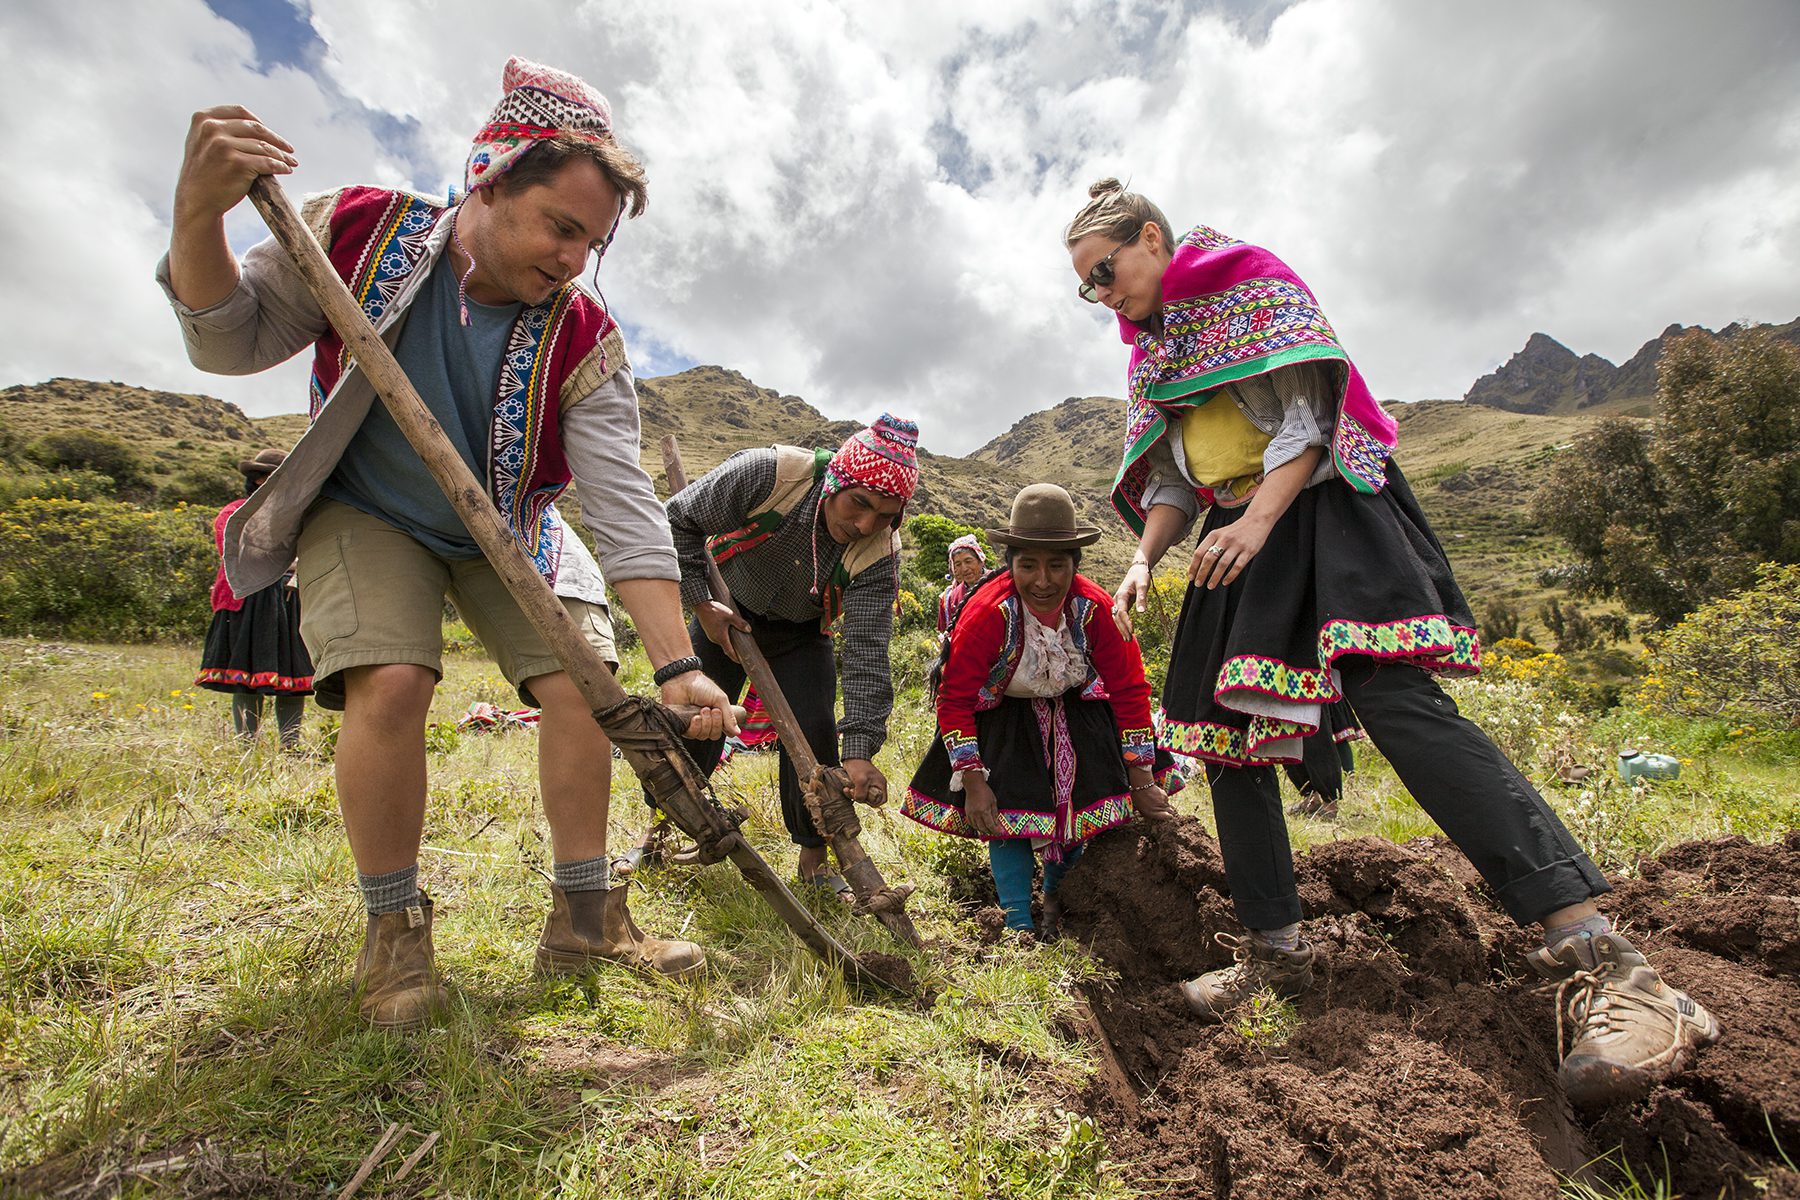 11The chaquitaclla, also known as the foot plow, was one of the most important farming tools of the Andean world | Responsible Travel Peru